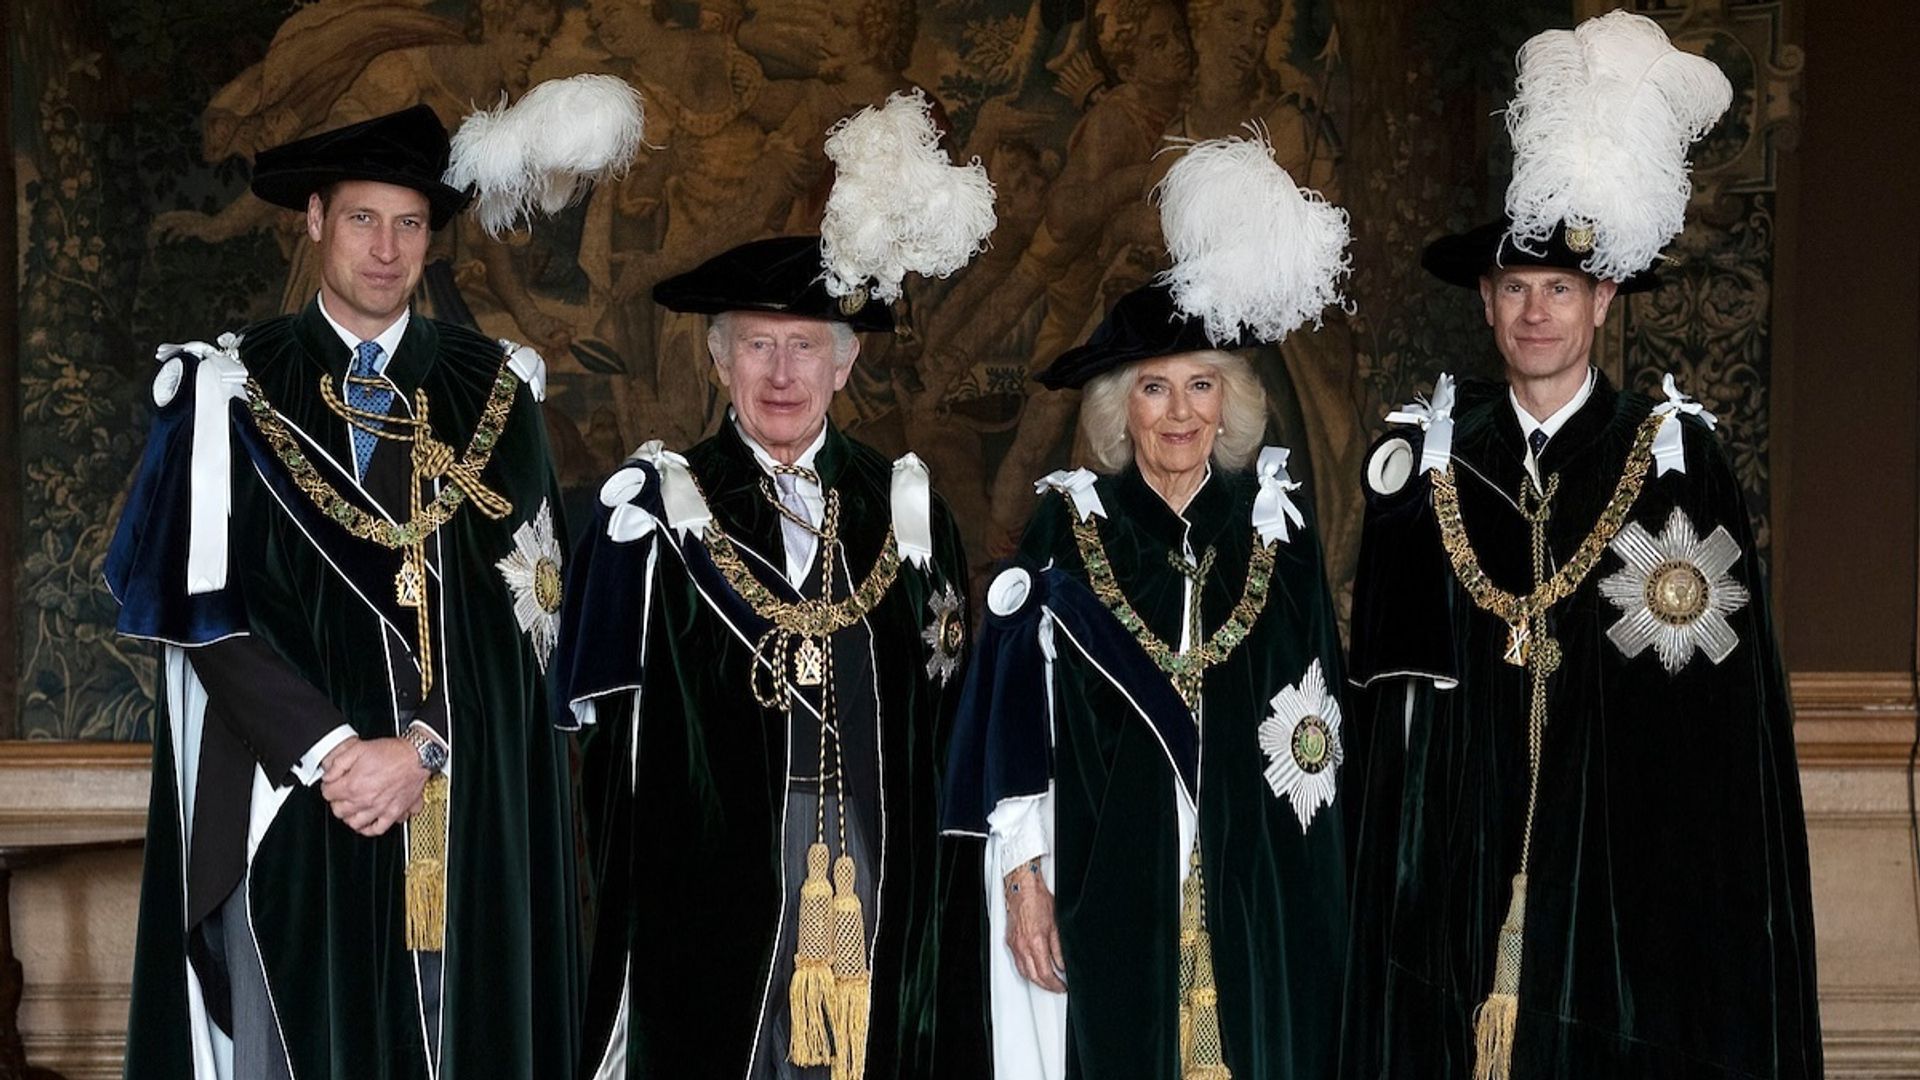 King Charles and Queen Camilla's portrait with Princes William and Edward sparks questions